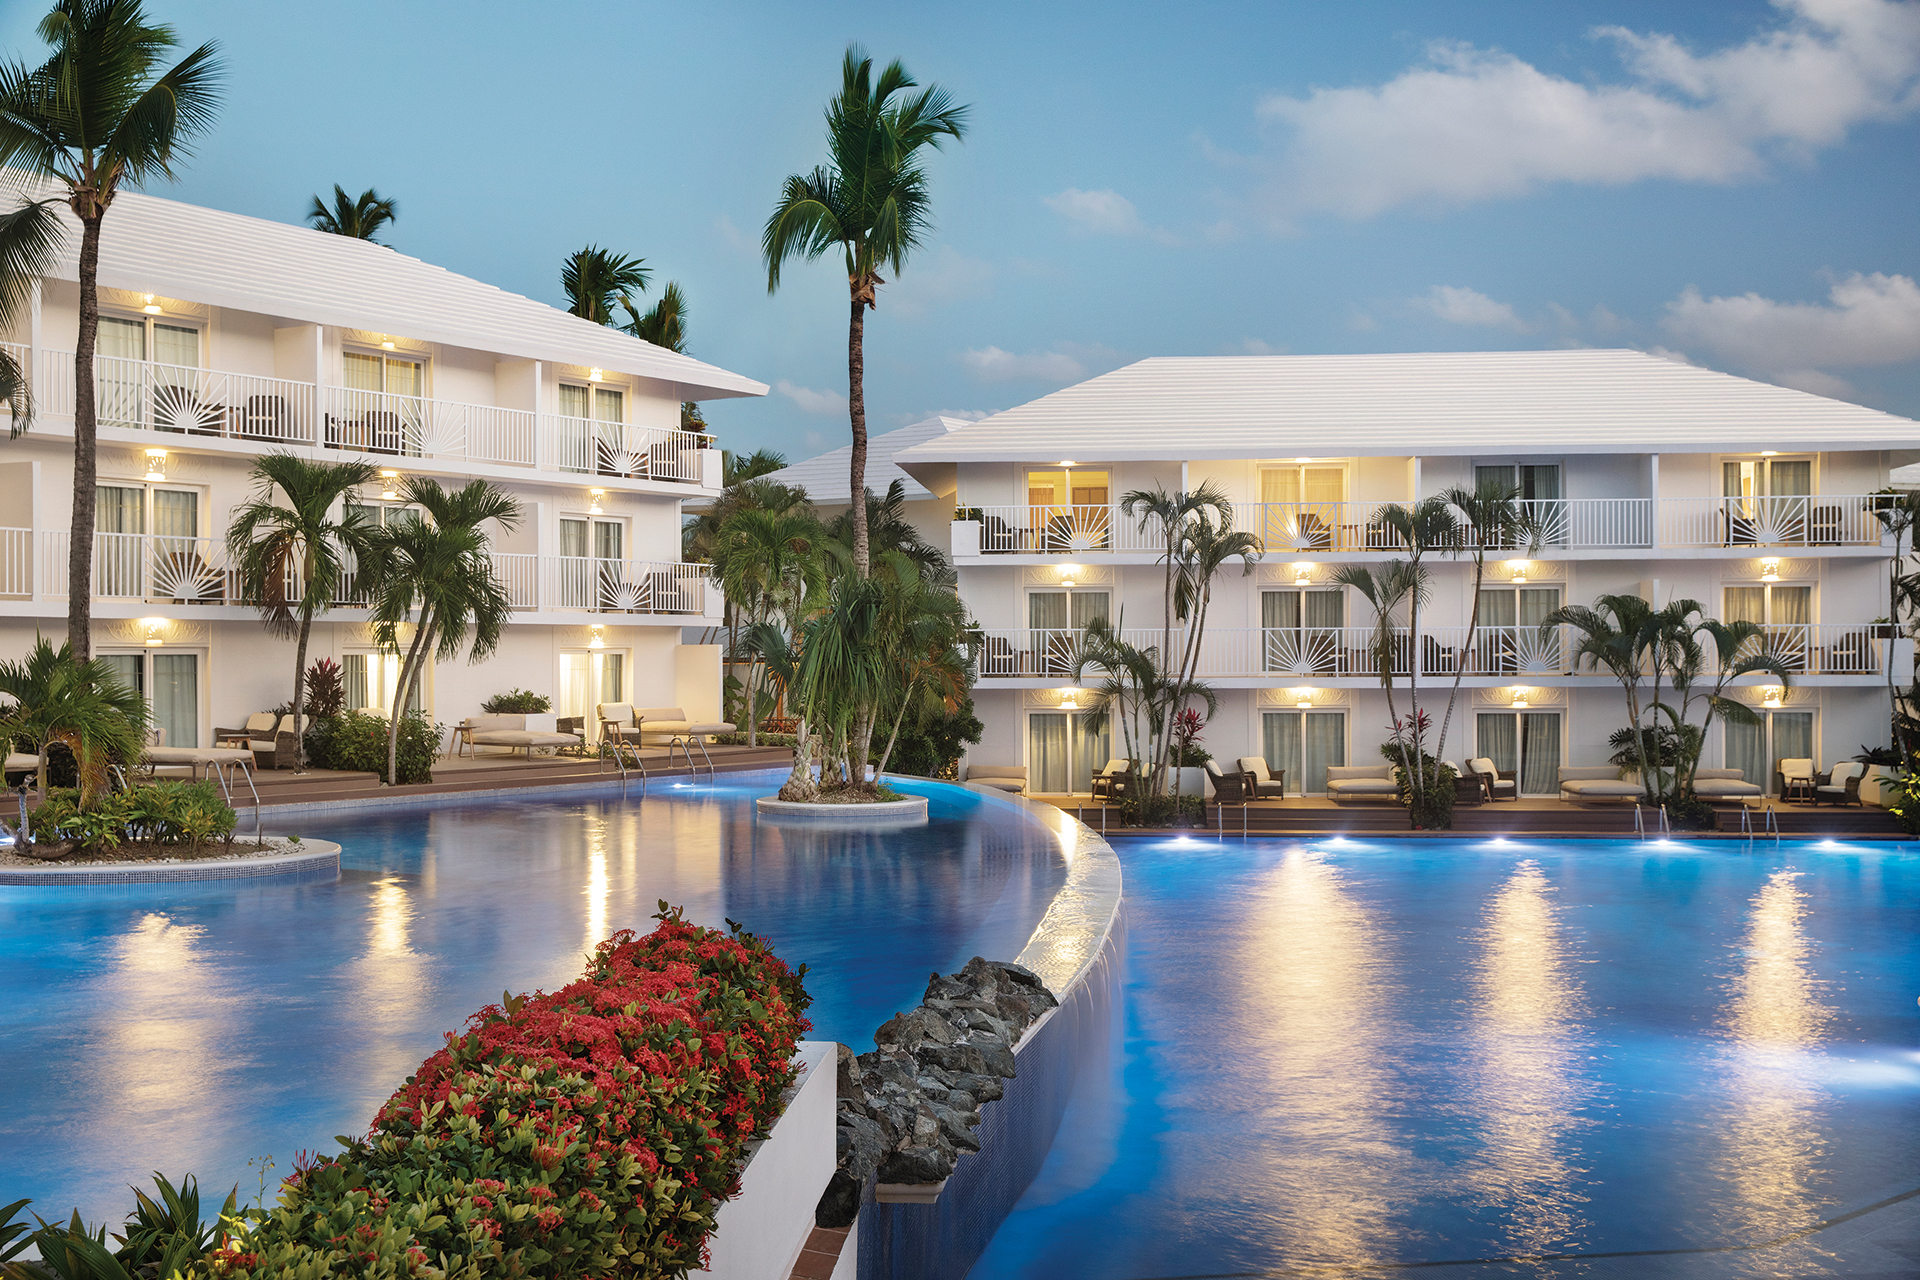 Excellence Punta Cana: One of the top resorts in the Caribbean